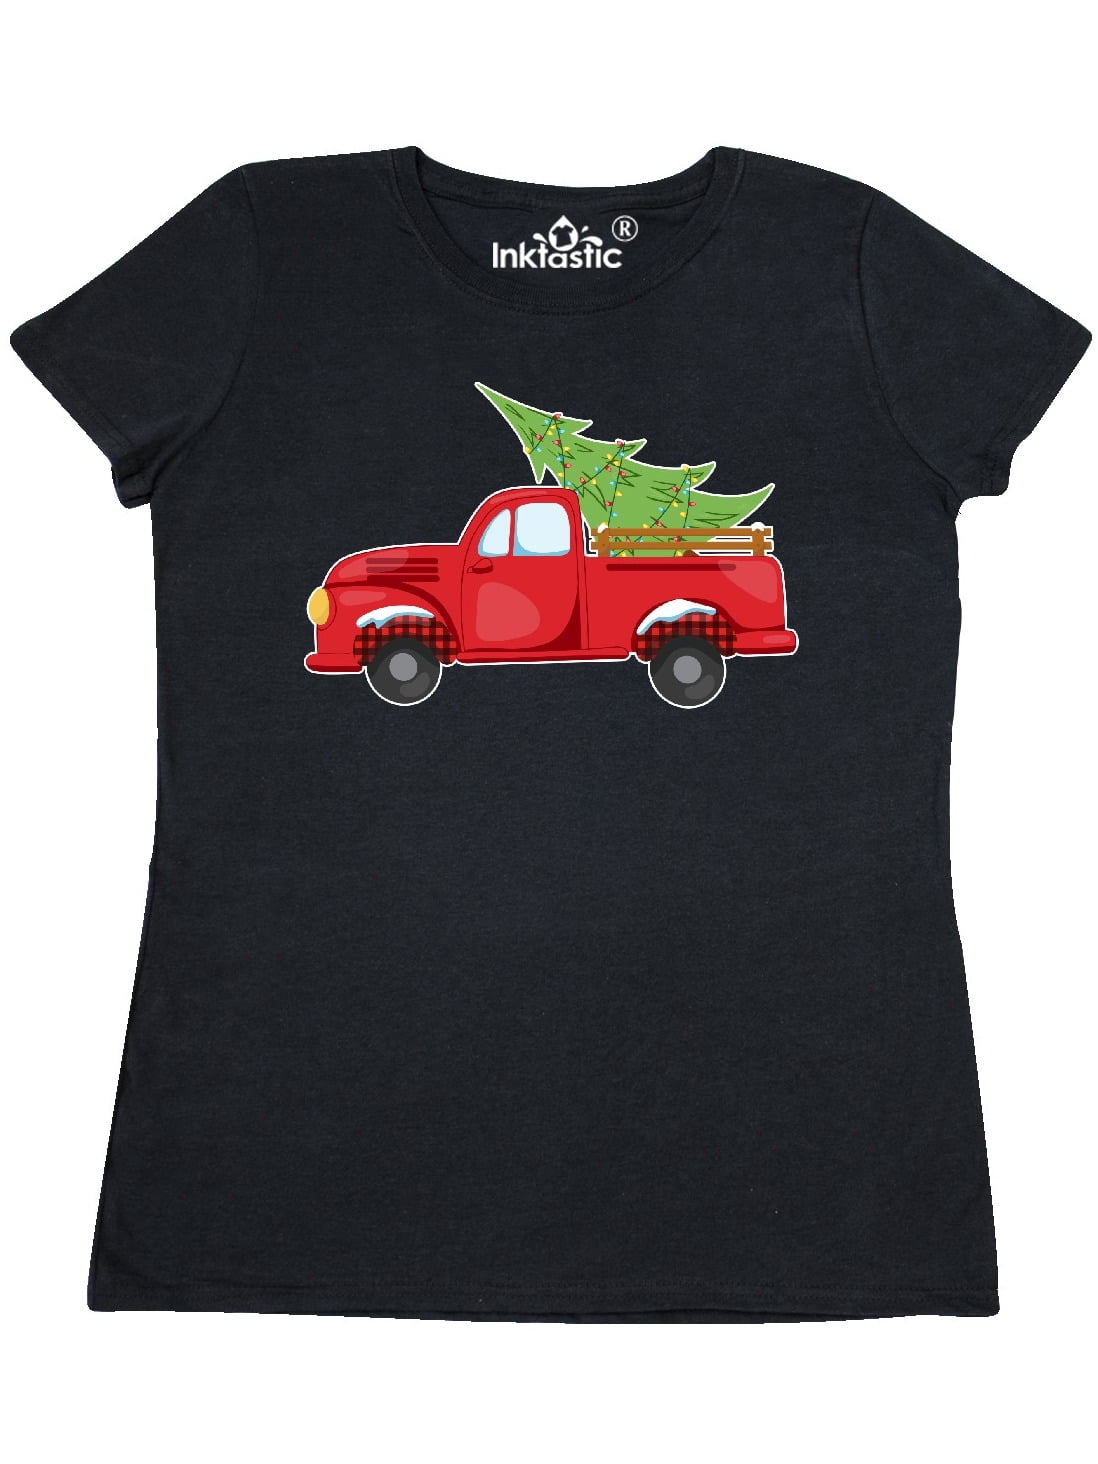 The Tree Isn't the Only Thing Getting Lit this Year T-shirt Chrsitmas Tee Women's V-Neck T-shirt Relaxed Fit Tee